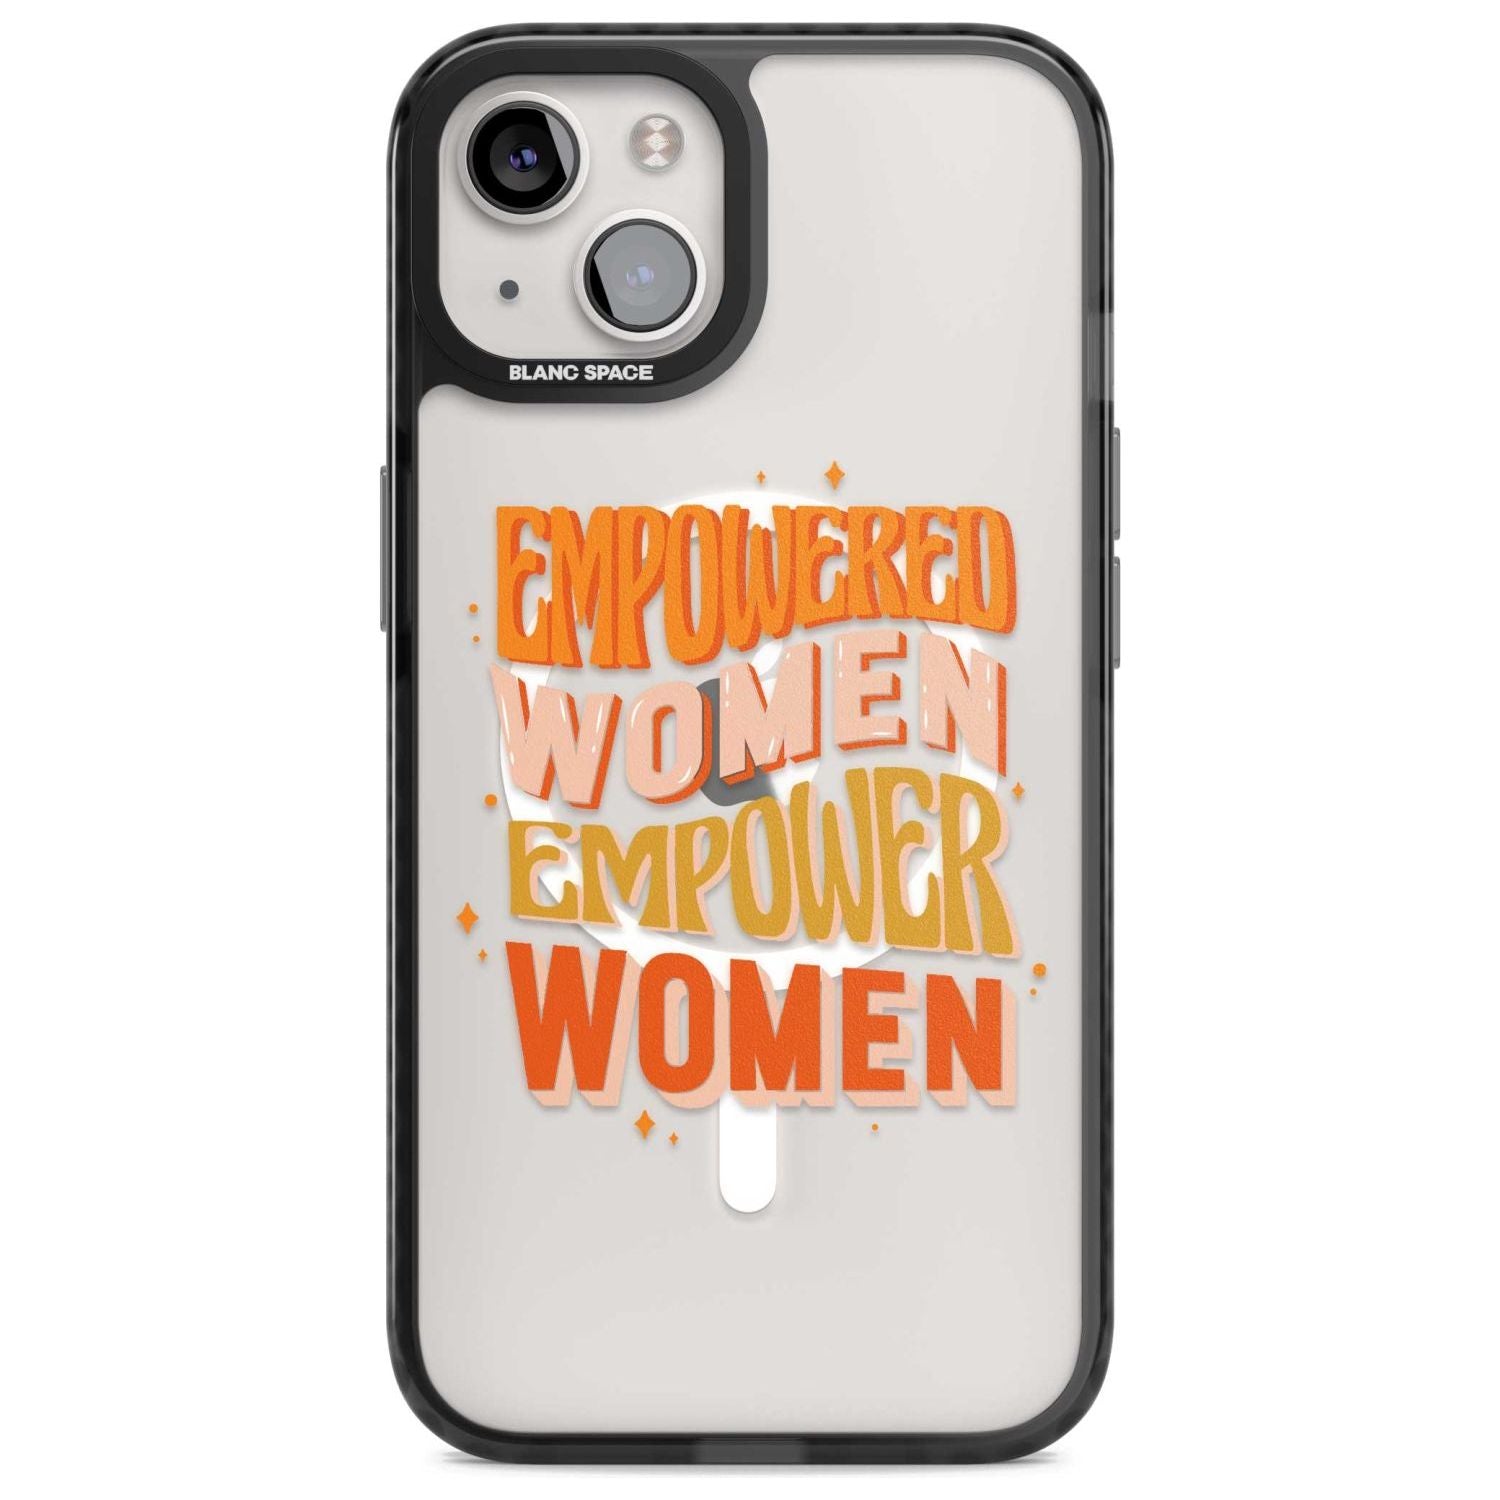 Empowered Women Phone Case iPhone 15 Plus / Magsafe Black Impact Case,iPhone 15 / Magsafe Black Impact Case,iPhone 14 Plus / Magsafe Black Impact Case,iPhone 14 / Magsafe Black Impact Case,iPhone 13 / Magsafe Black Impact Case Blanc Space